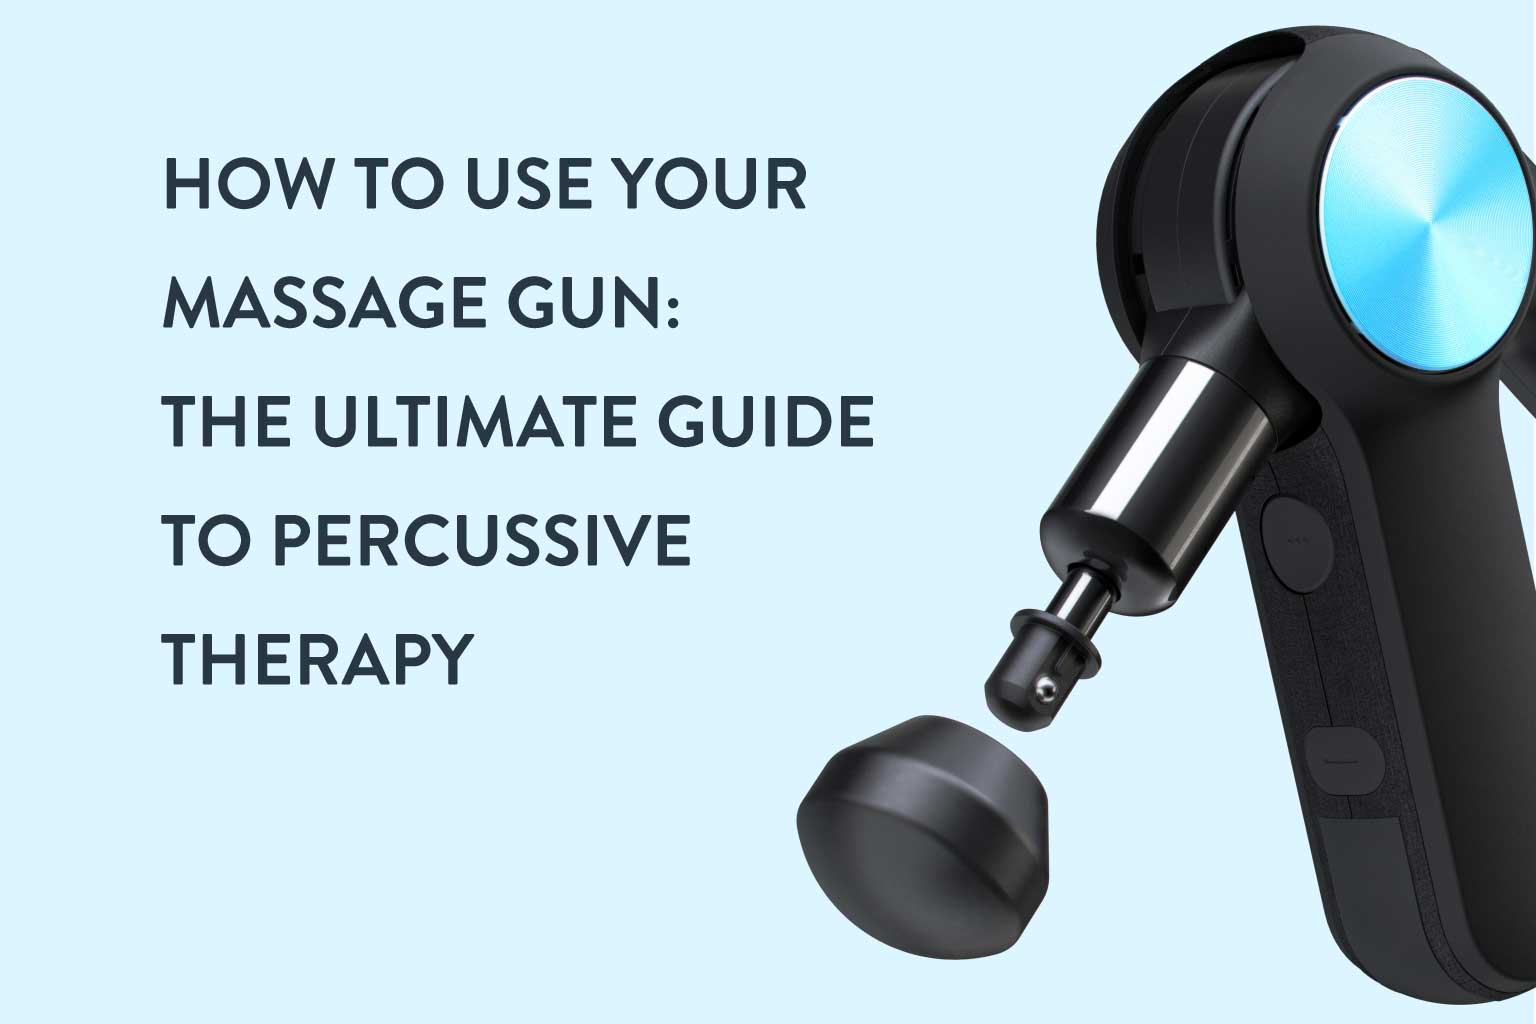 How To Use Your Massage Gun: The Ultimate Guide To Percussive Therapy